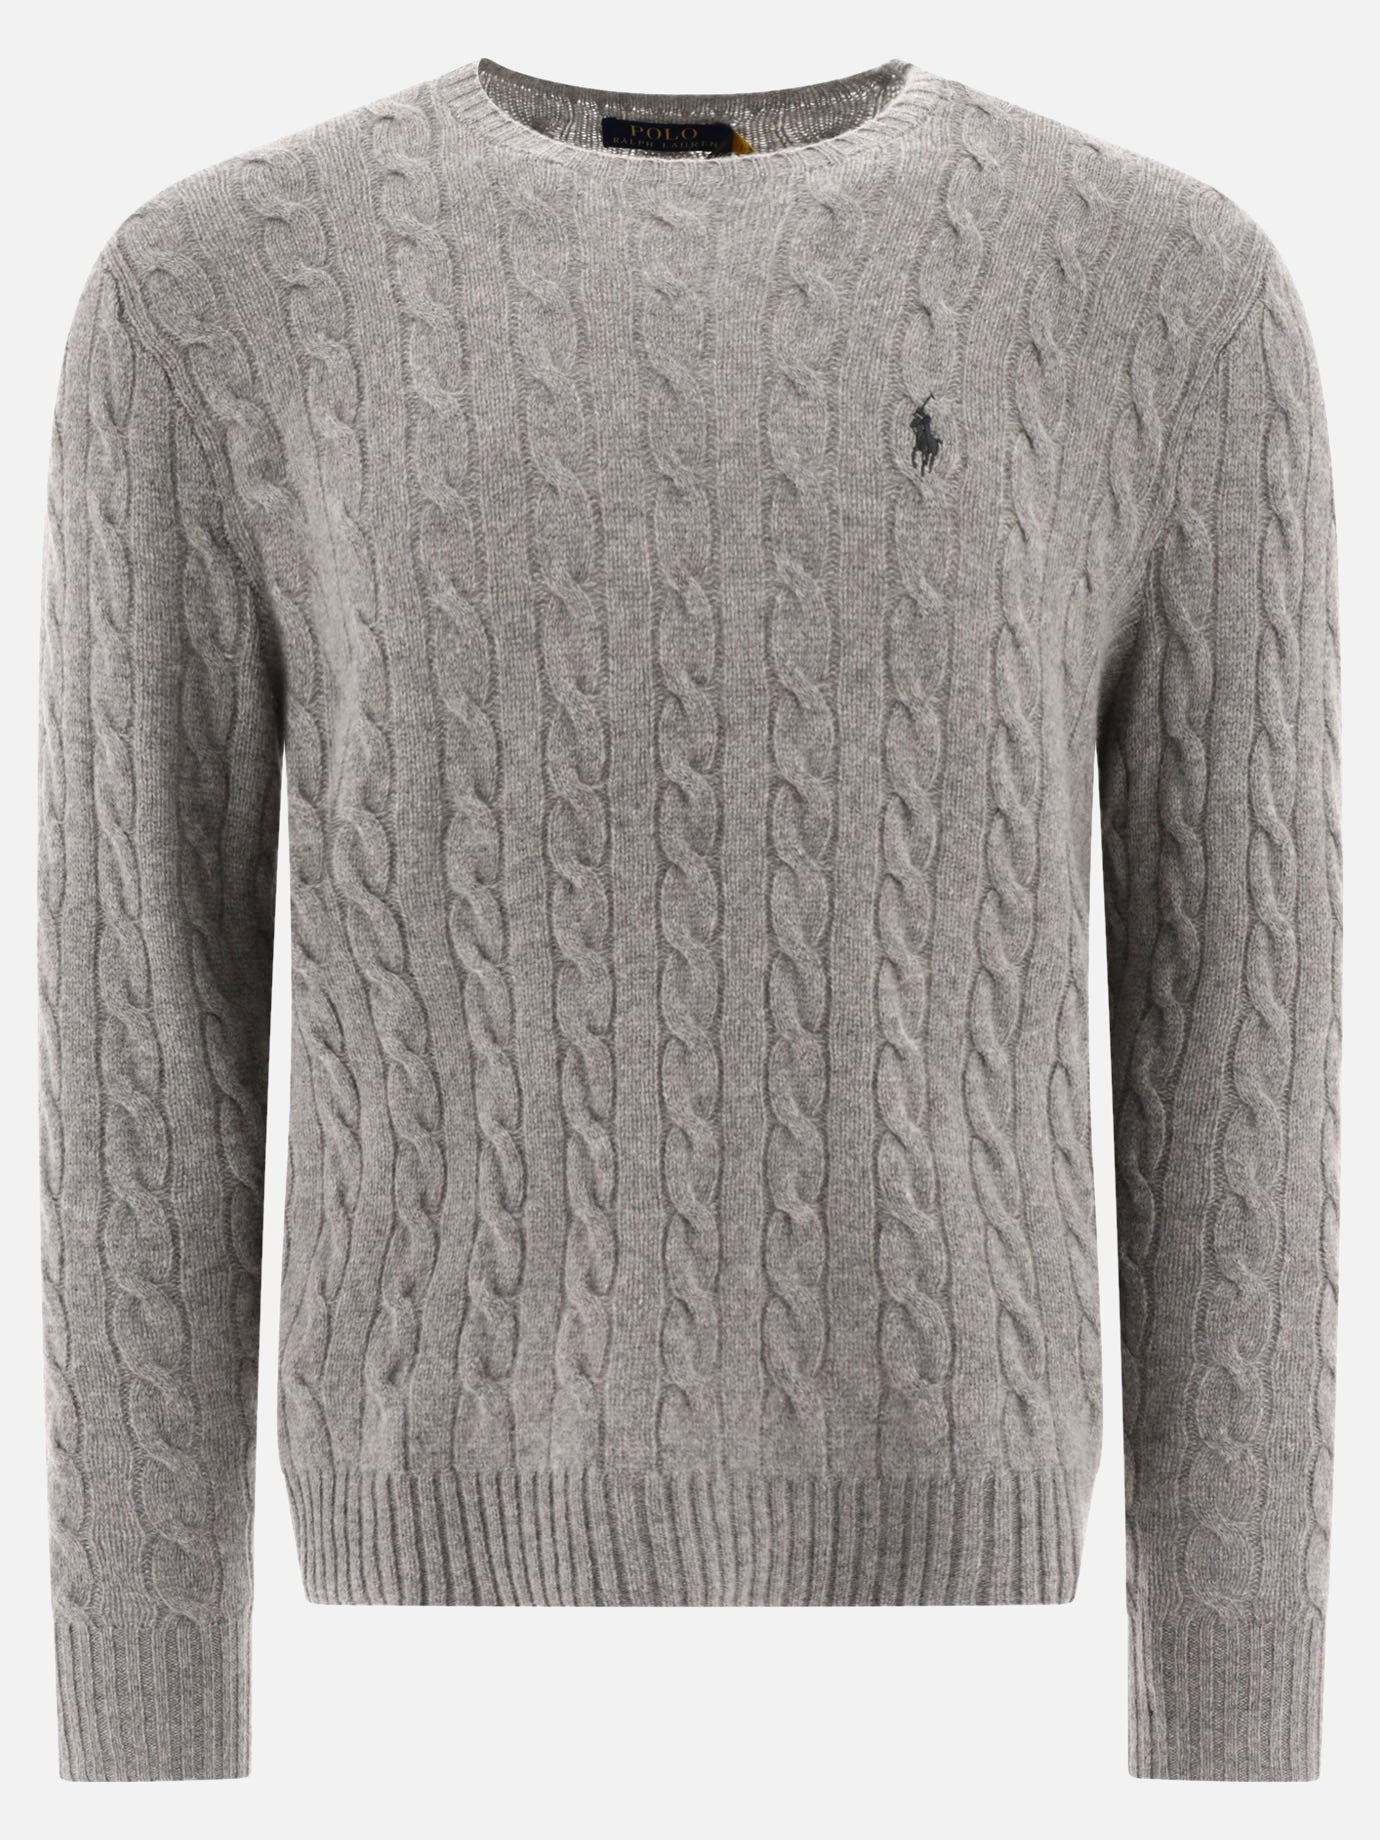 "Pony" cable-knit sweater